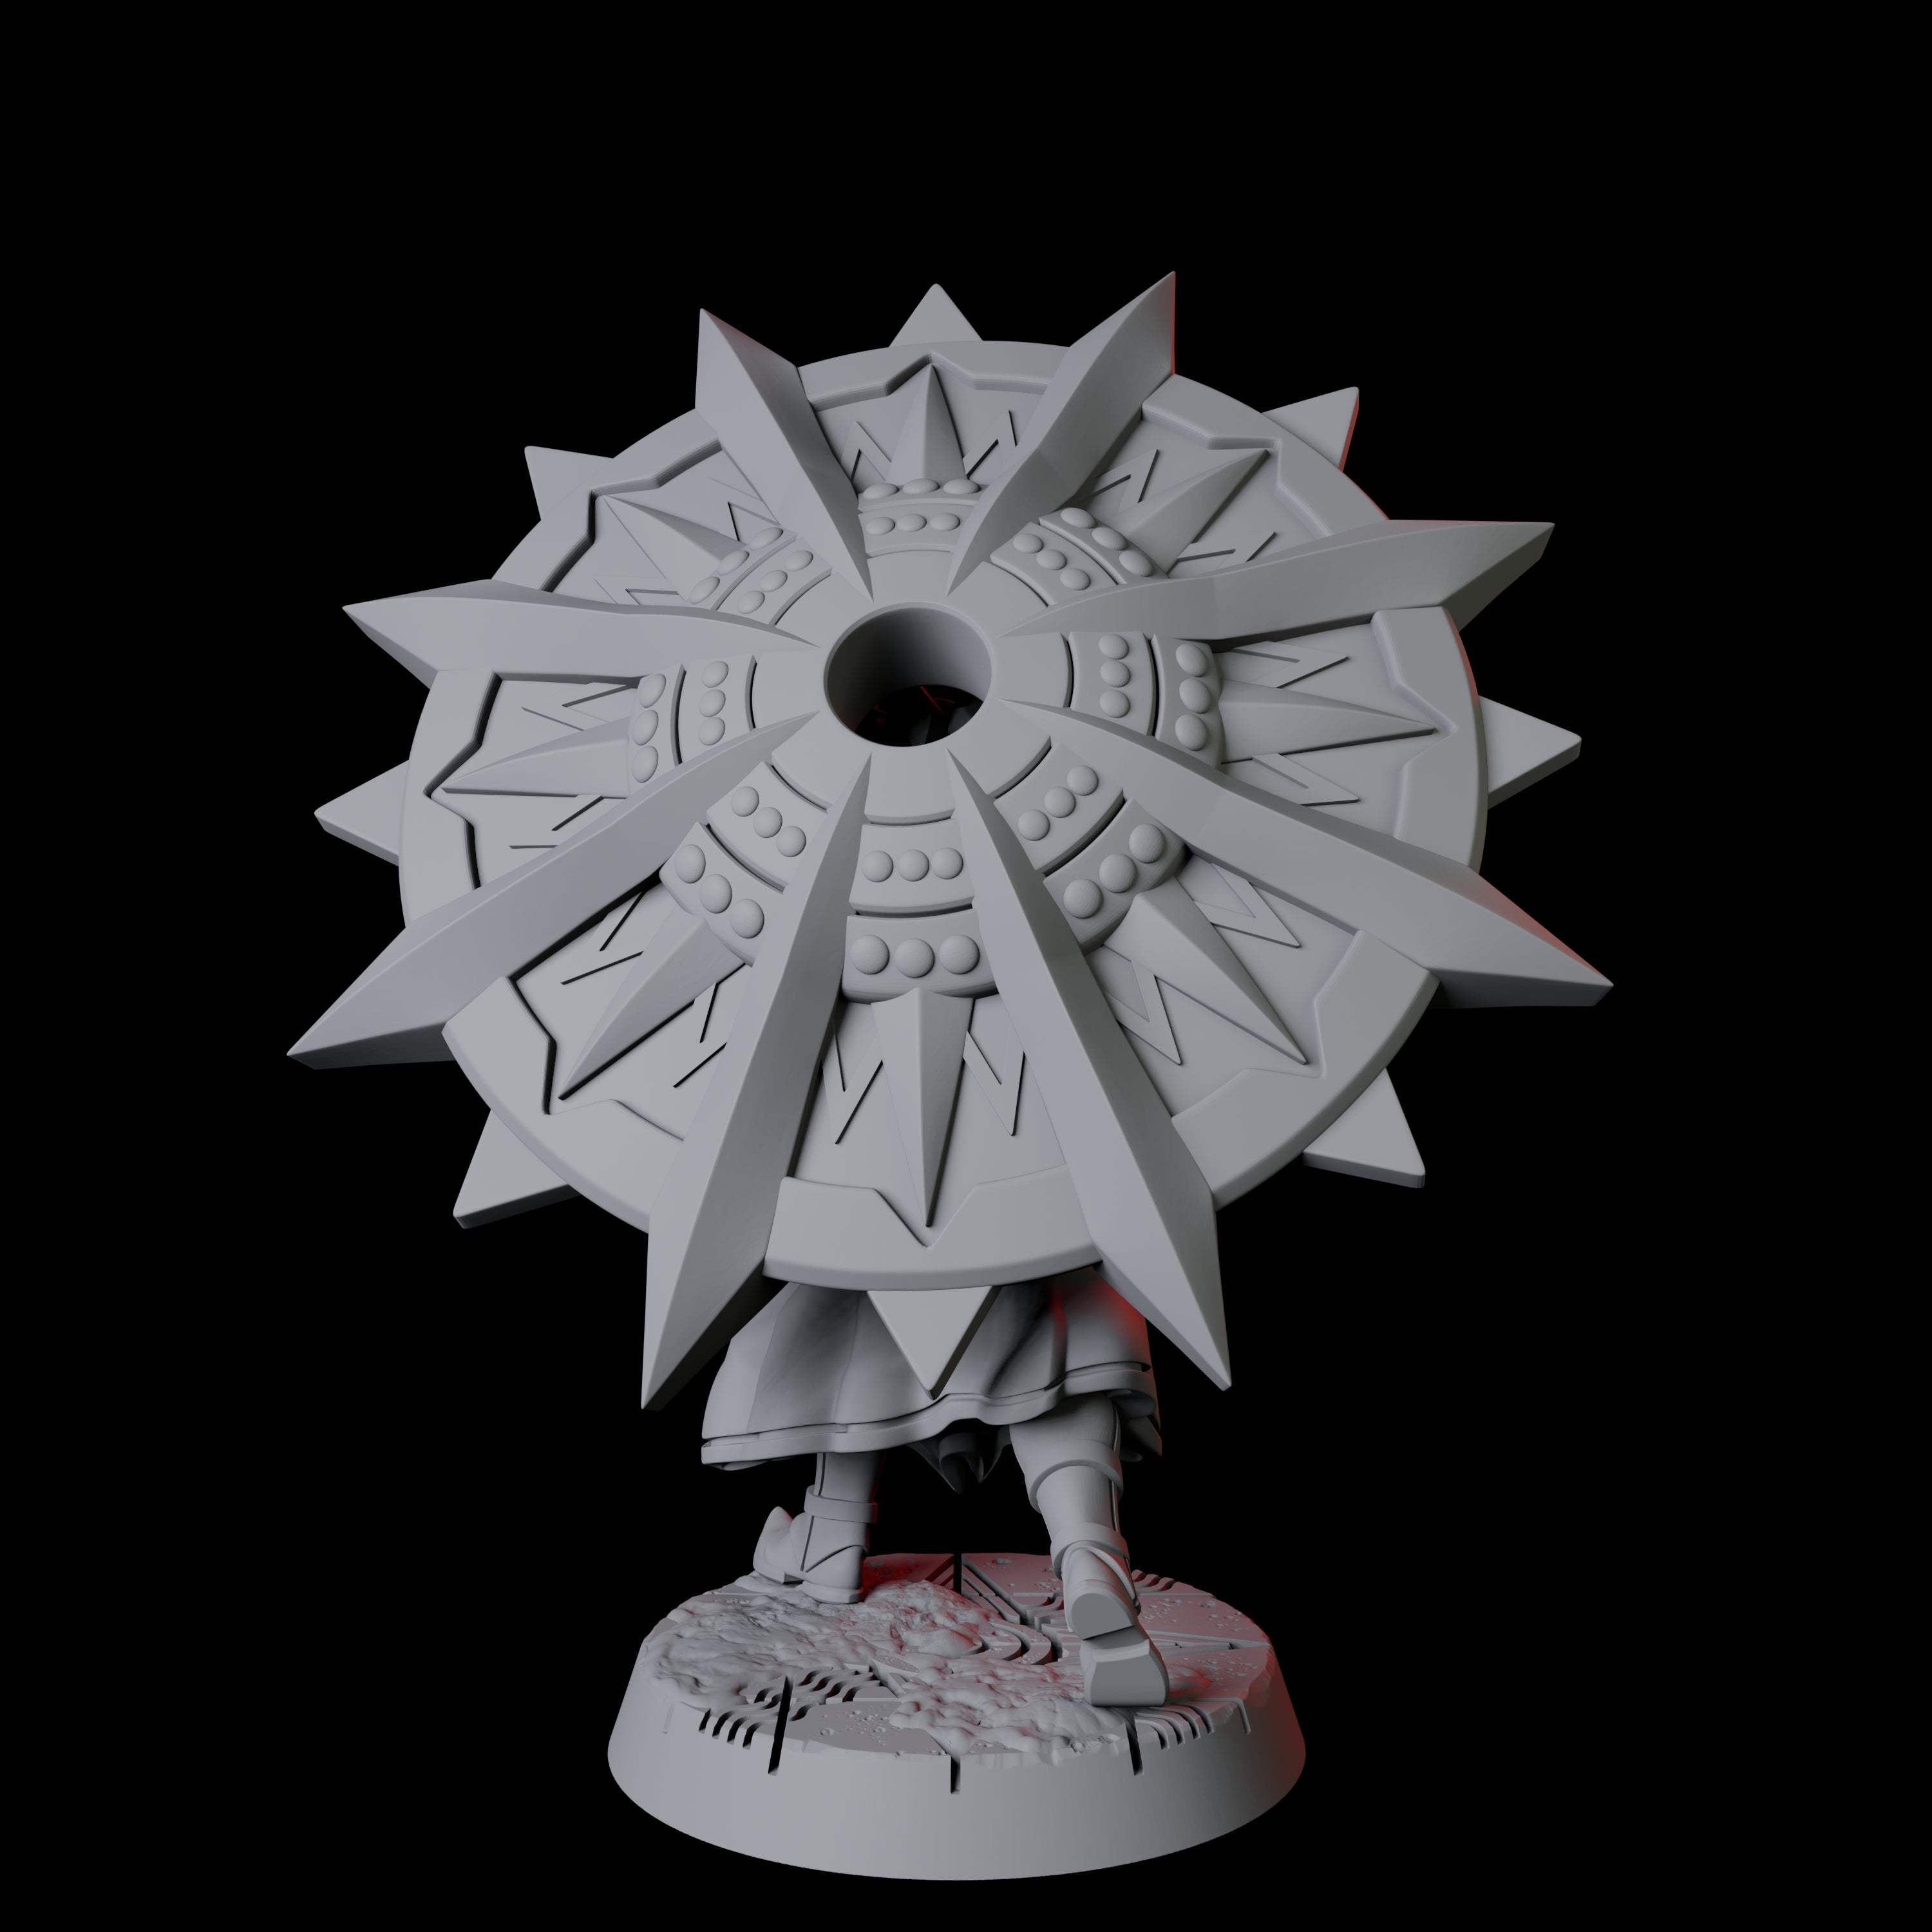 Sun Worshipping Cultist B Miniature for Dungeons and Dragons, Pathfinder or other TTRPGs